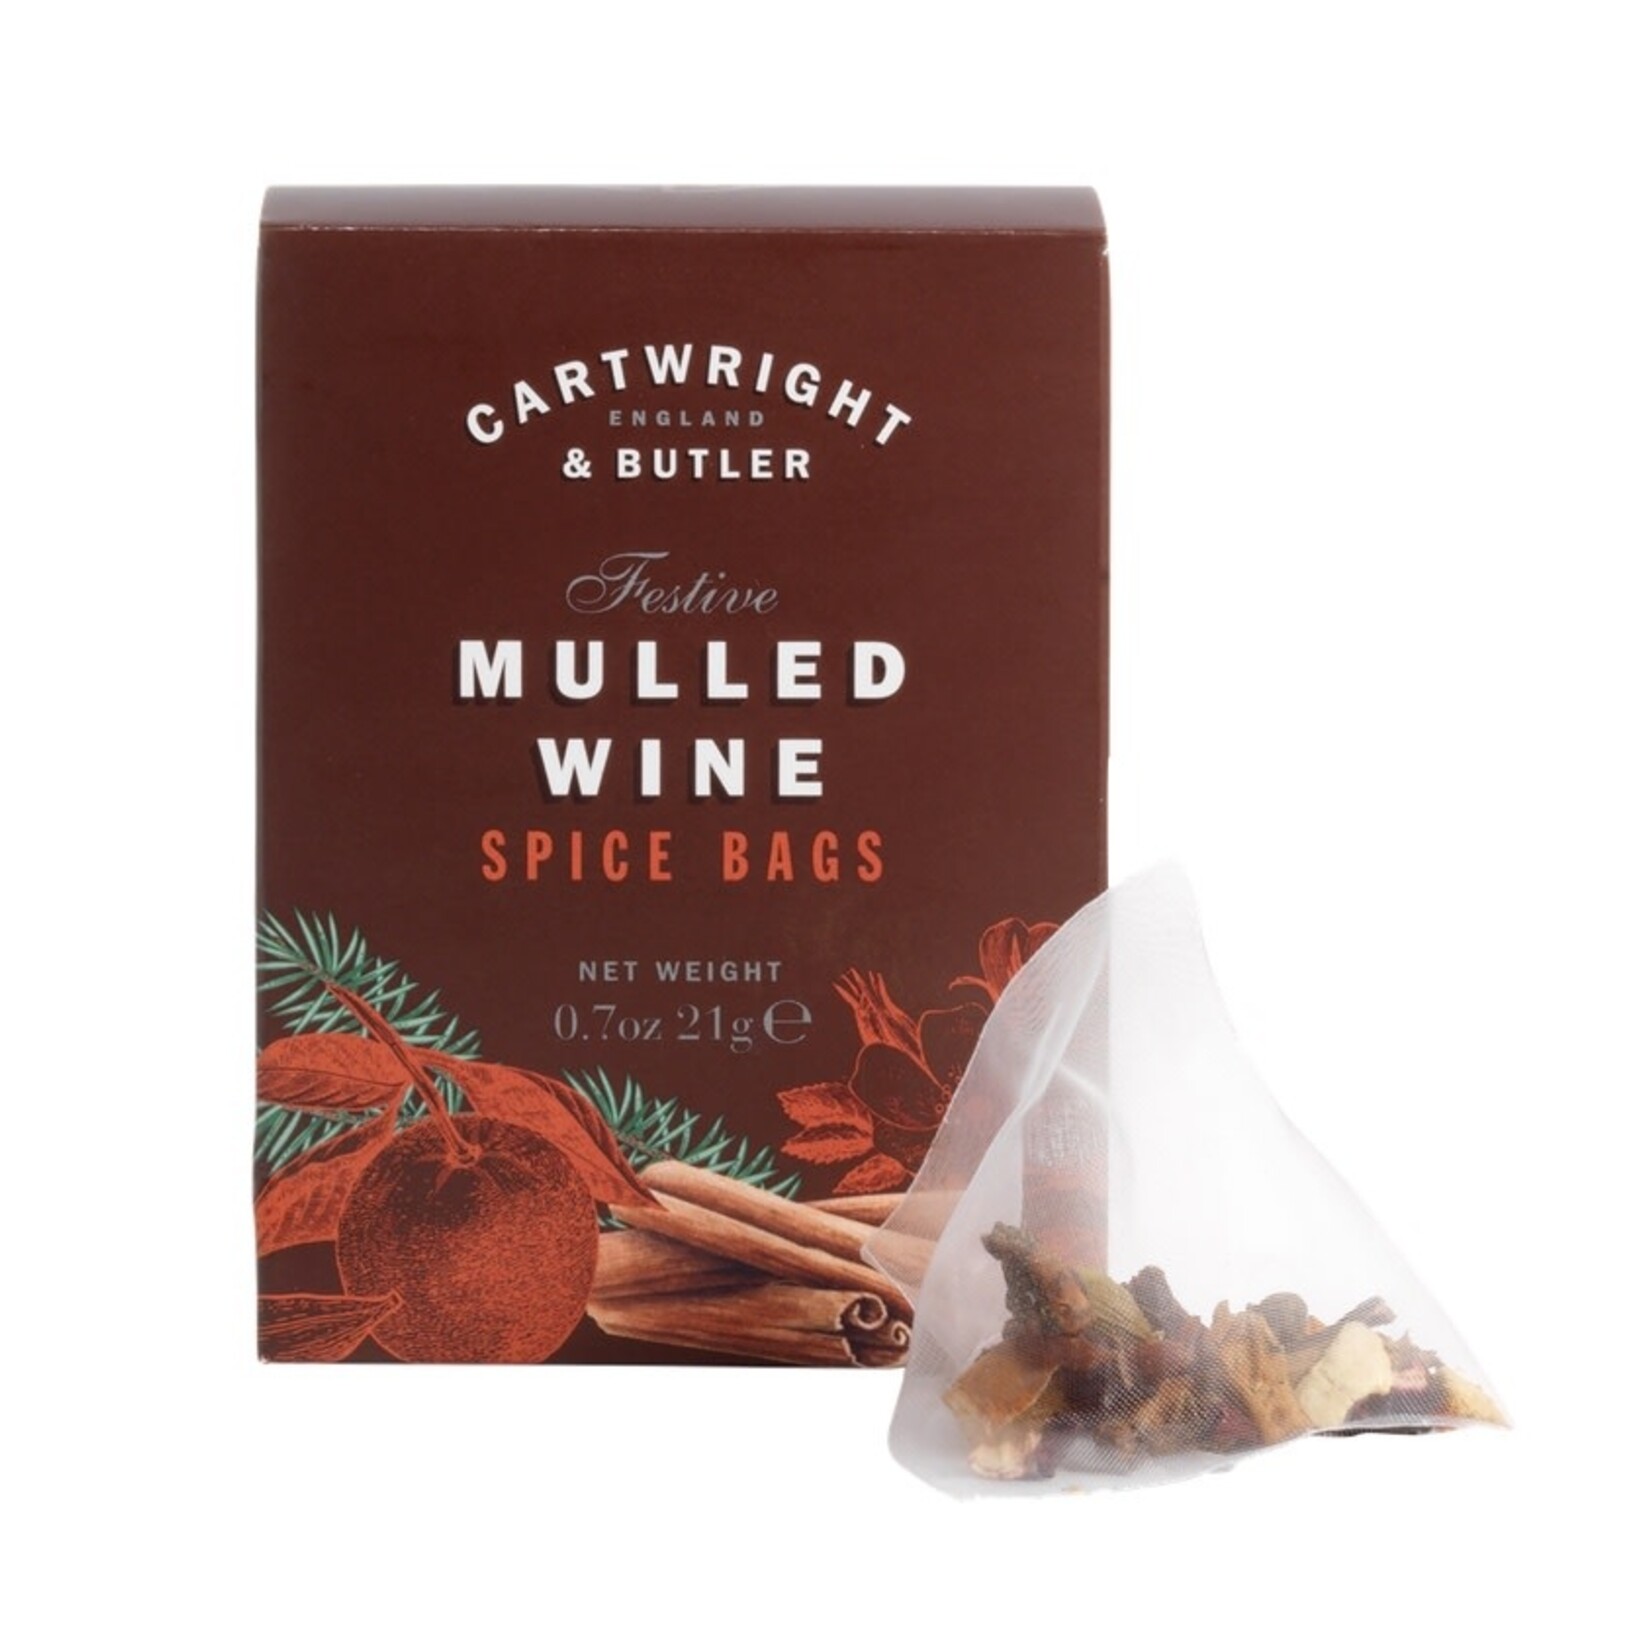 CARTWRIGHT & BUTLER Mulled Wine Spice Bags